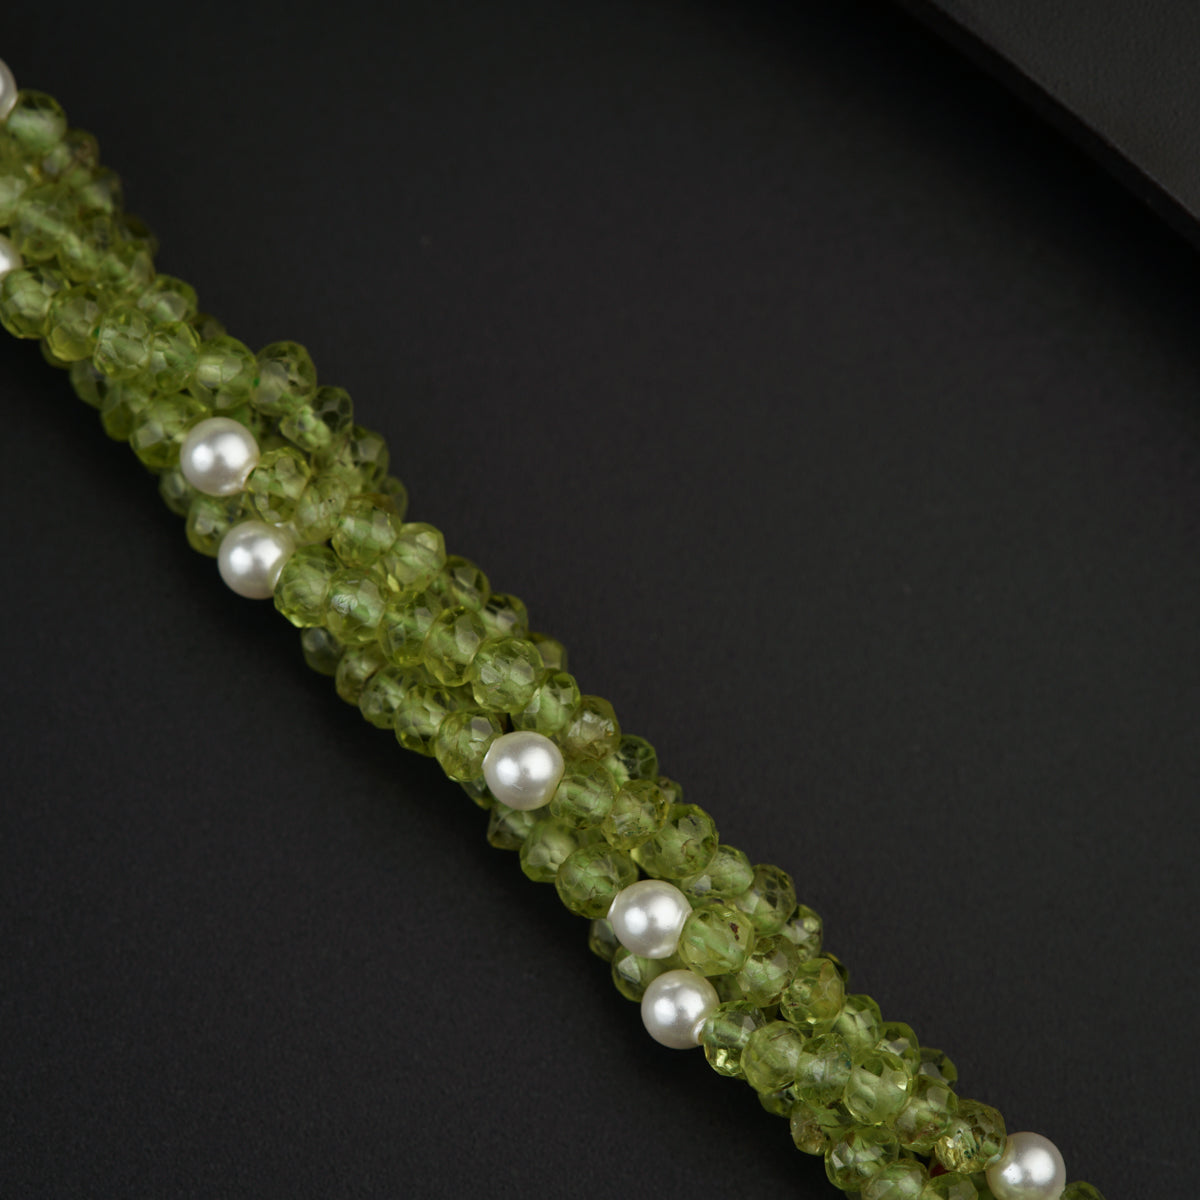 a green beaded bracelet with pearls on a black background